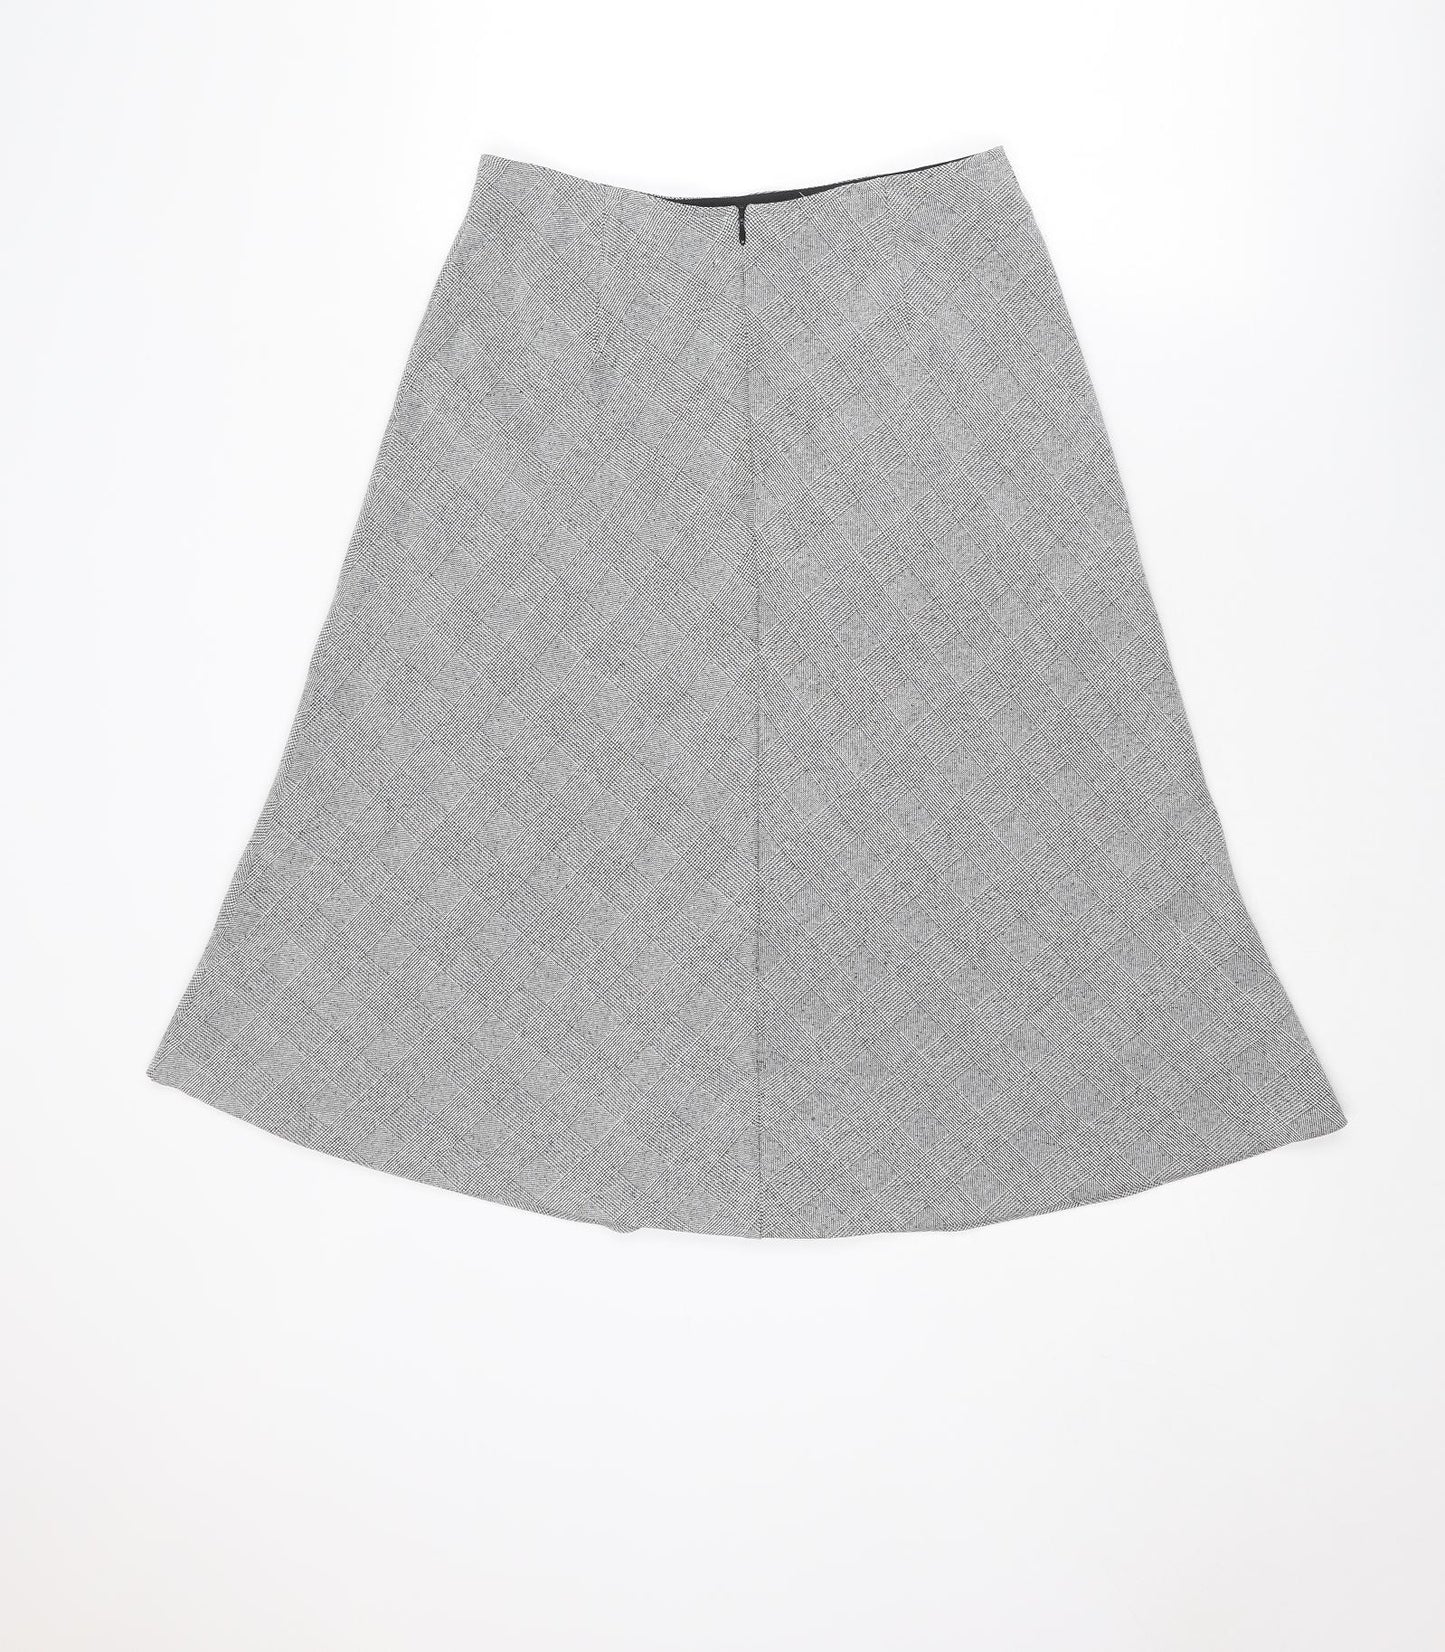 H&M Womens Grey Plaid Polyester A-Line Skirt Size 10 Zip